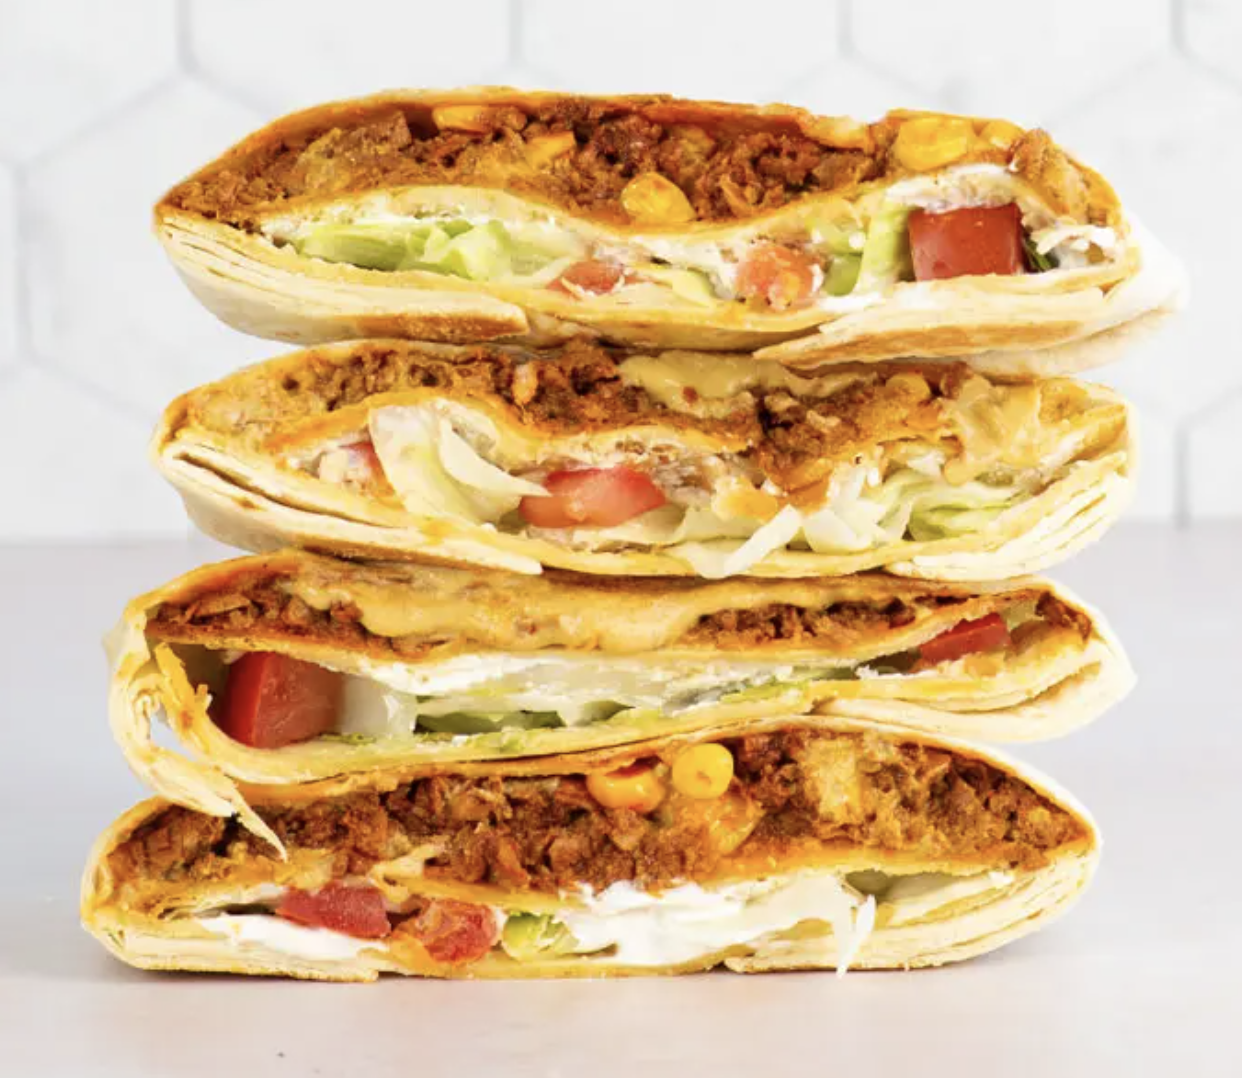 Four stacked burritos are halved to show the filling of seasoned beef, lettuce, tomato, corn, and cheese. The background appears to be a light-colored countertop